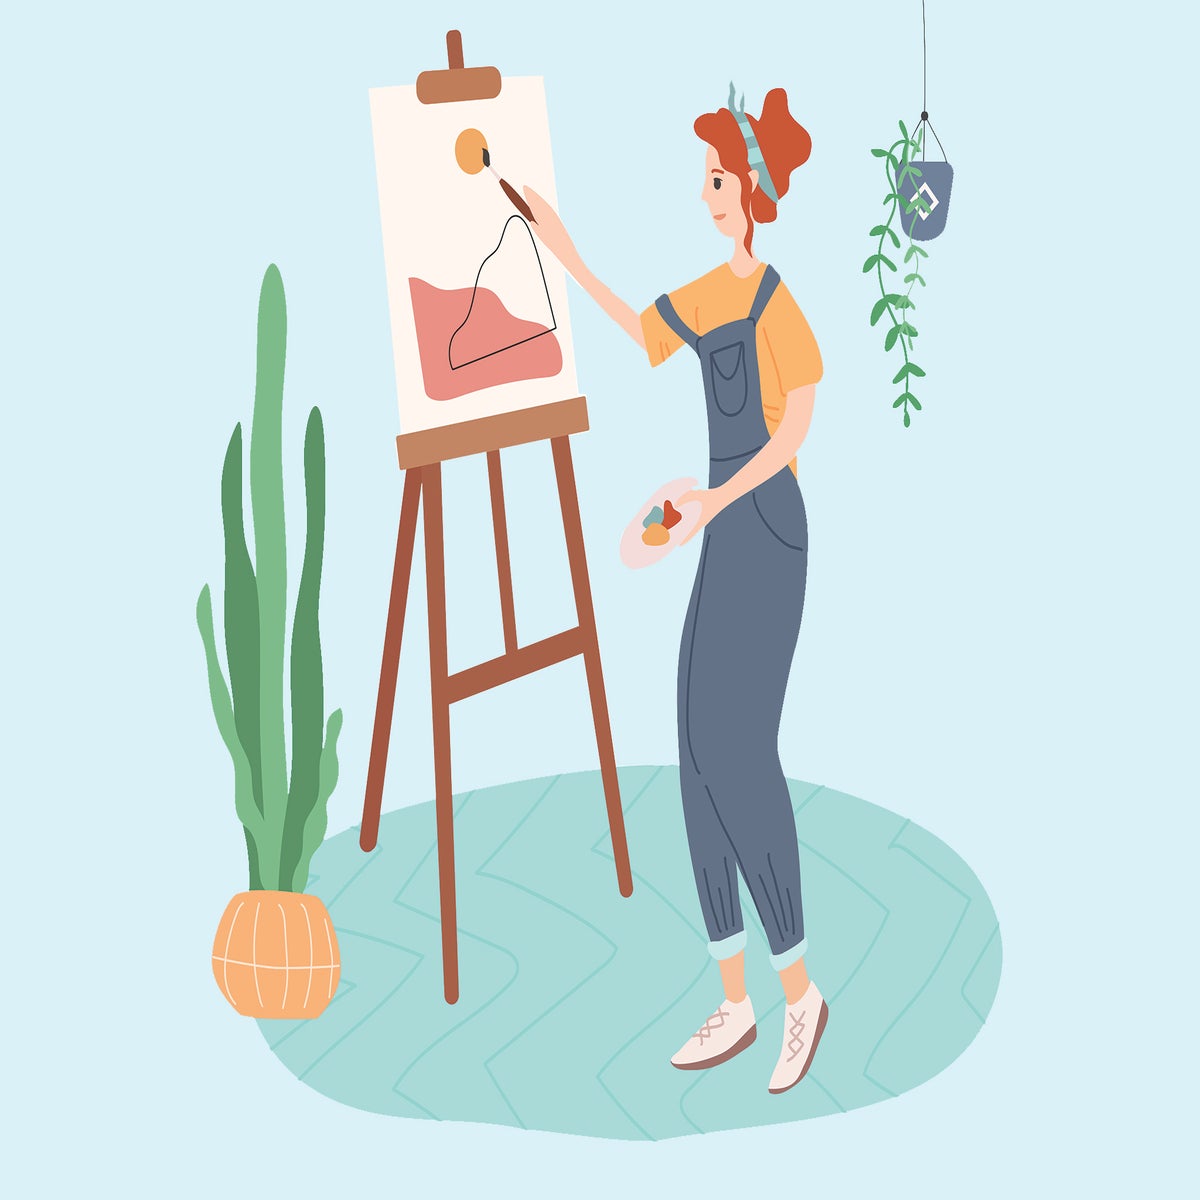 Art for beginners: How to draw, paint and more, according to ...